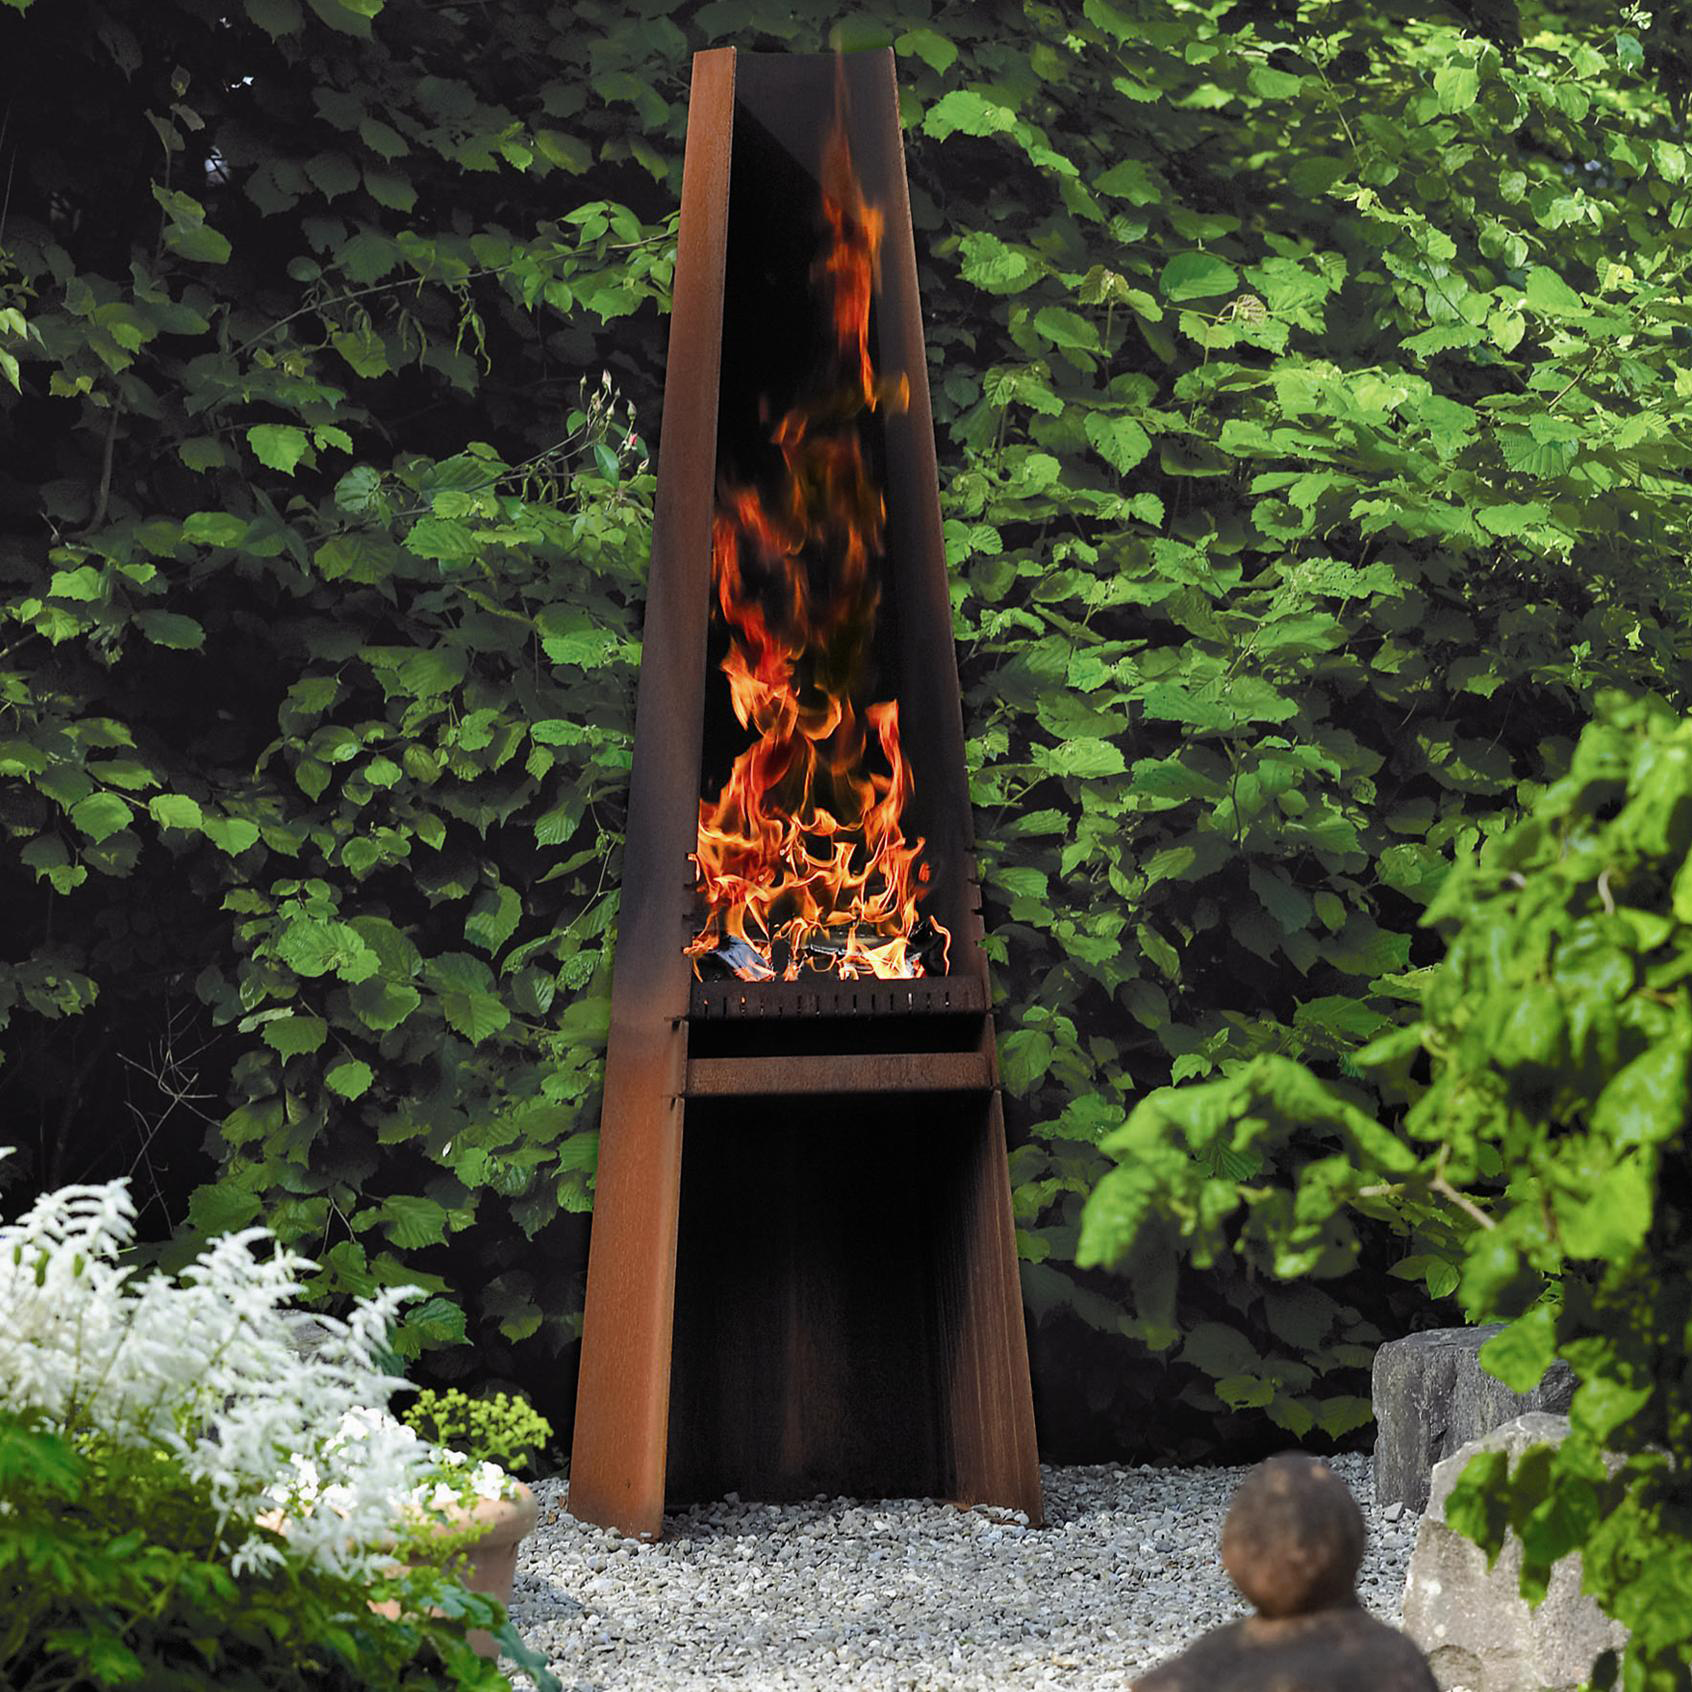 Rais Gizeh Outdoor Wood Fireplace and Grill For Sale